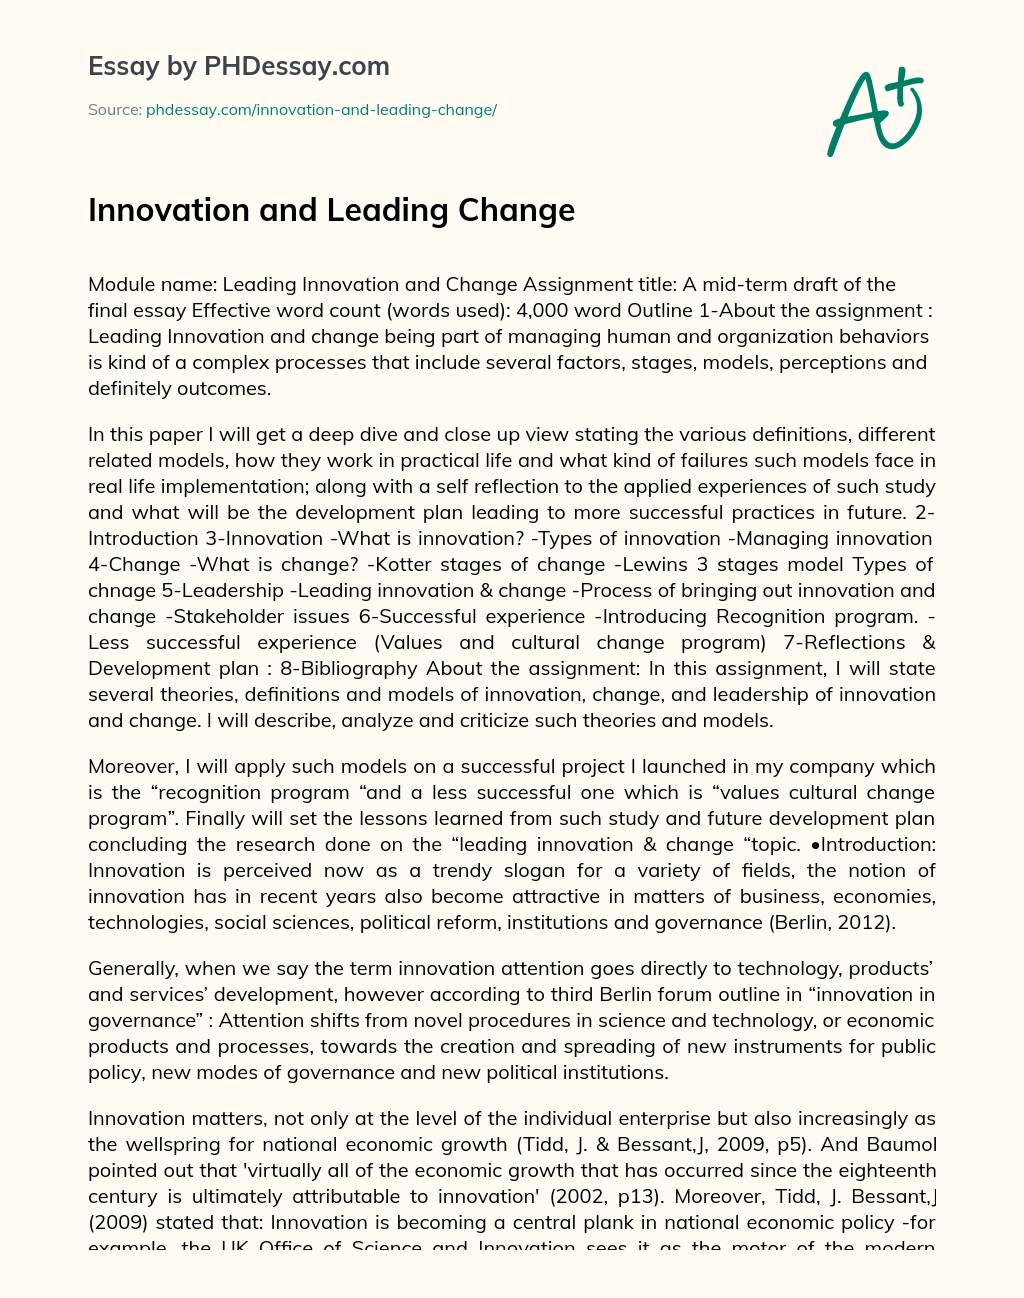 Innovation and Leading Change essay